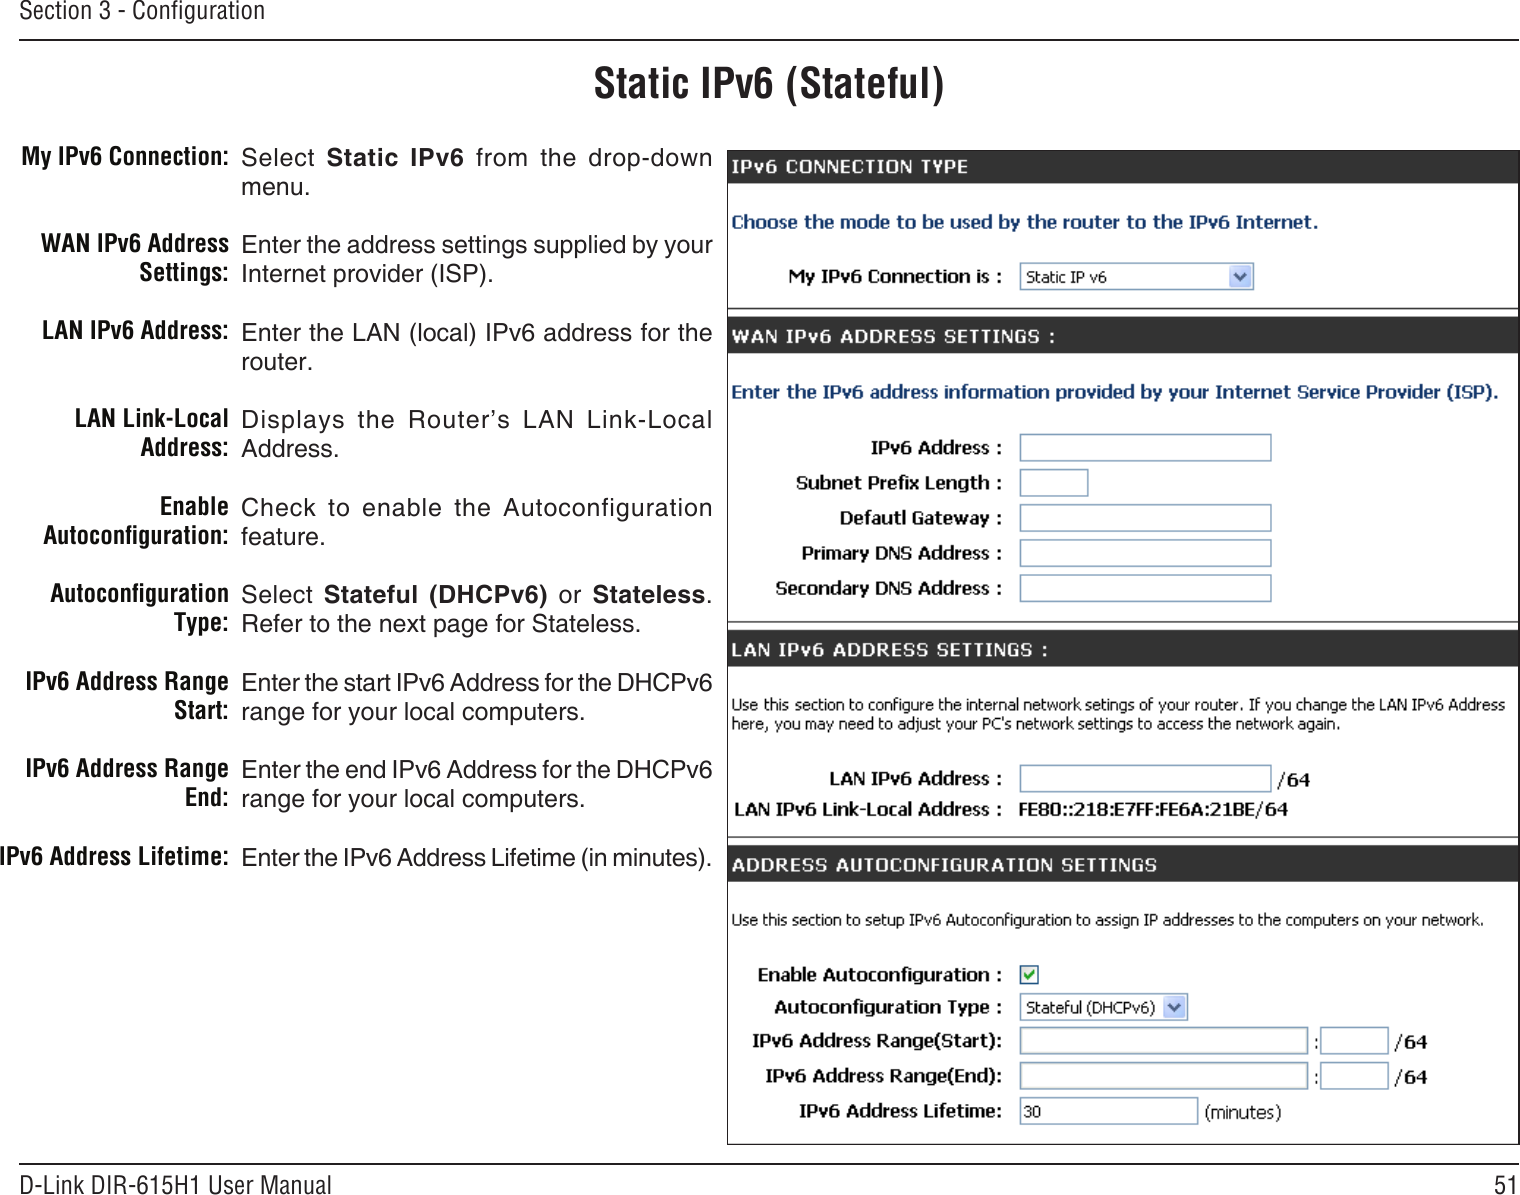 51D-Link DIR-615H1 User ManualSection 3 - CongurationStatic IPv6 (Stateful)Select  Static  IPv6  from  the  drop-down menu.Enter the address settings supplied by your Internet provider (ISP). Enter the LAN (local) IPv6 address for the router. Displays  the  Router’s  LAN  Link-Local Address.Check  to  enable  the  Autoconfiguration feature.Select  Stateful  (DHCPv6)  or  Stateless. Refer to the next page for Stateless.Enter the start IPv6 Address for the DHCPv6 range for your local computers.Enter the end IPv6 Address for the DHCPv6 range for your local computers.Enter the IPv6 Address Lifetime (in minutes).My IPv6 Connection:WAN IPv6 Address Settings:LAN IPv6 Address:LAN Link-Local Address:Enable Autoconguration:Autoconguration Type:IPv6 Address Range Start:IPv6 Address Range End:IPv6 Address Lifetime: